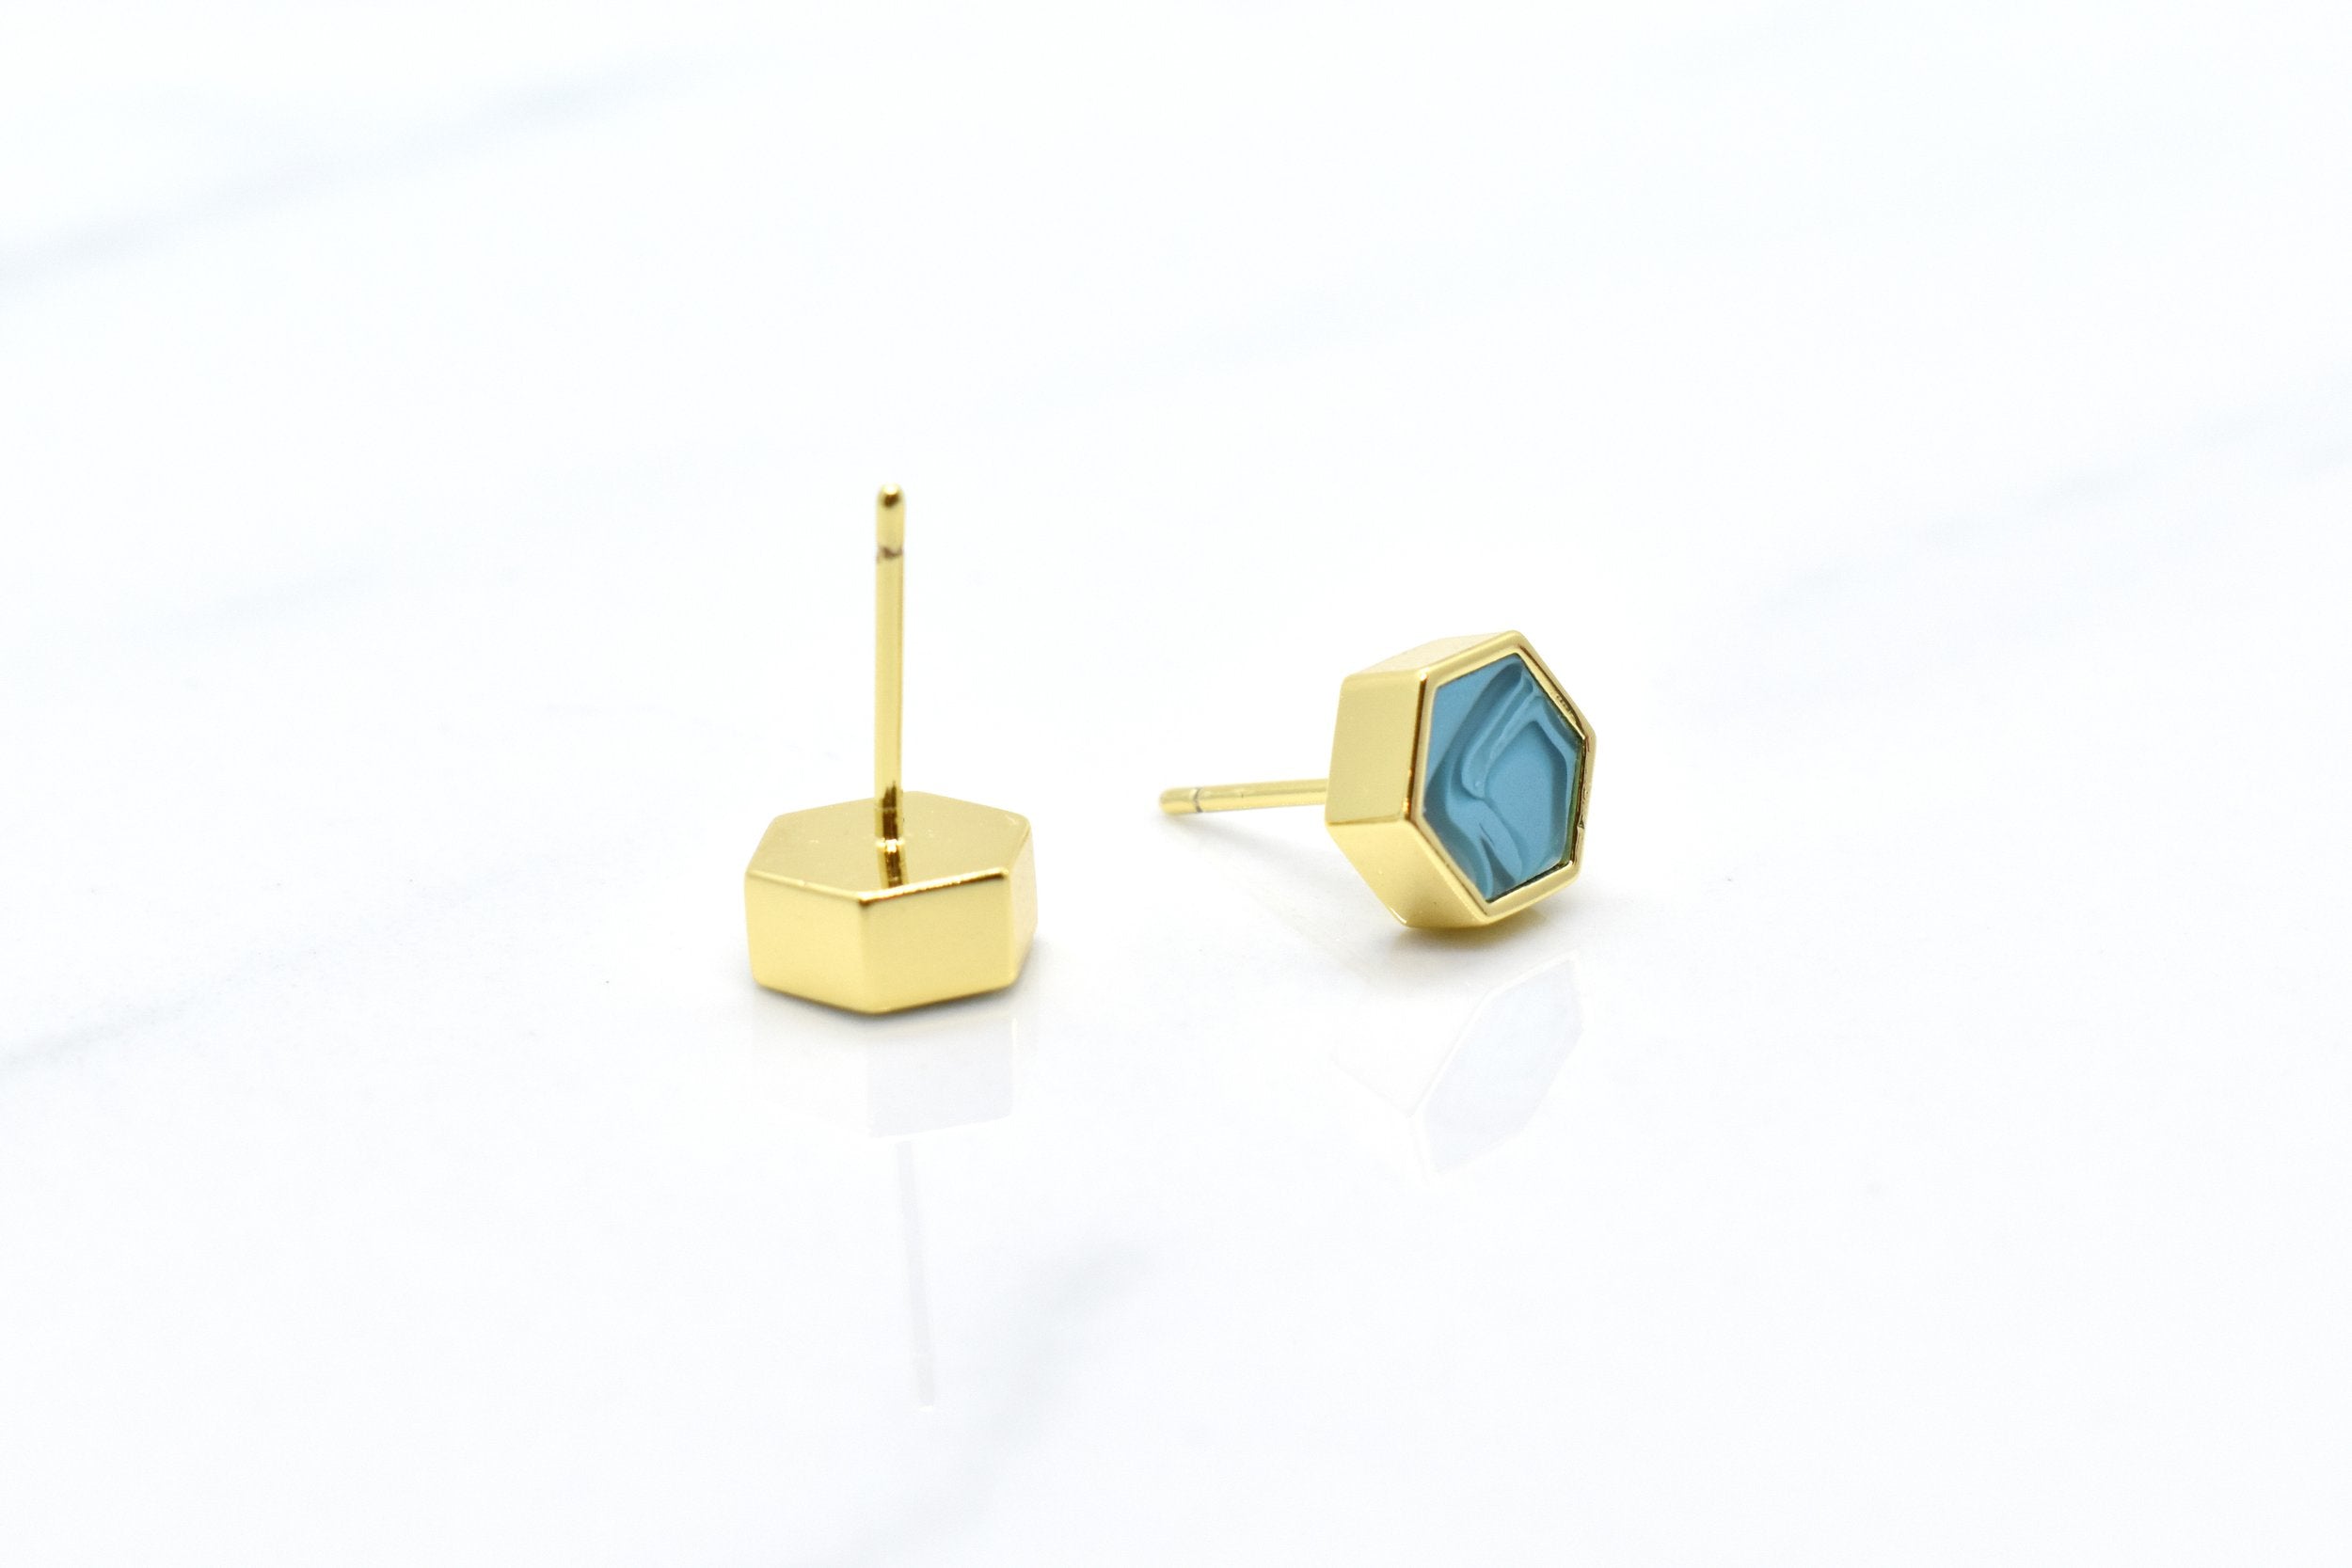 small gemstone inspired earrings in aquamarine and gold hexagon studs march birthstone jewelry earrings